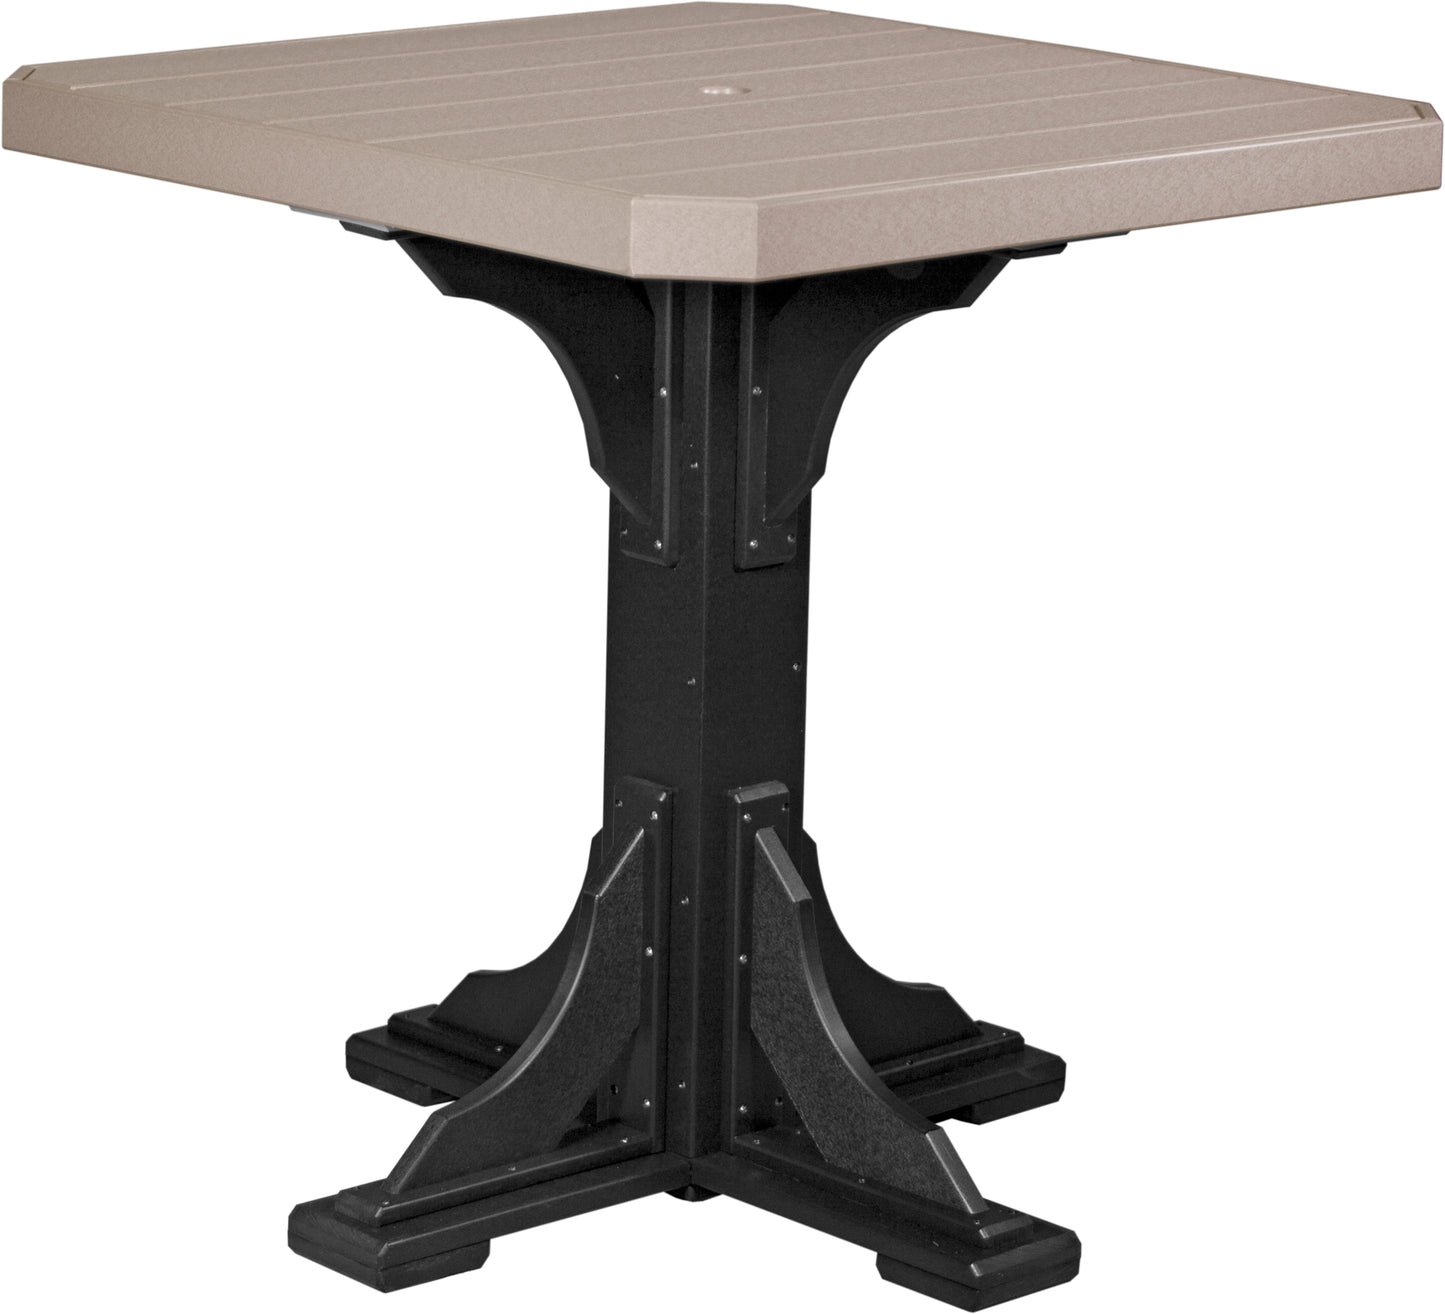 LuxCraft Recycled Plastic 41" Square Bar Height Table - LEAD TIME TO SHIP 3 TO 4 WEEKS